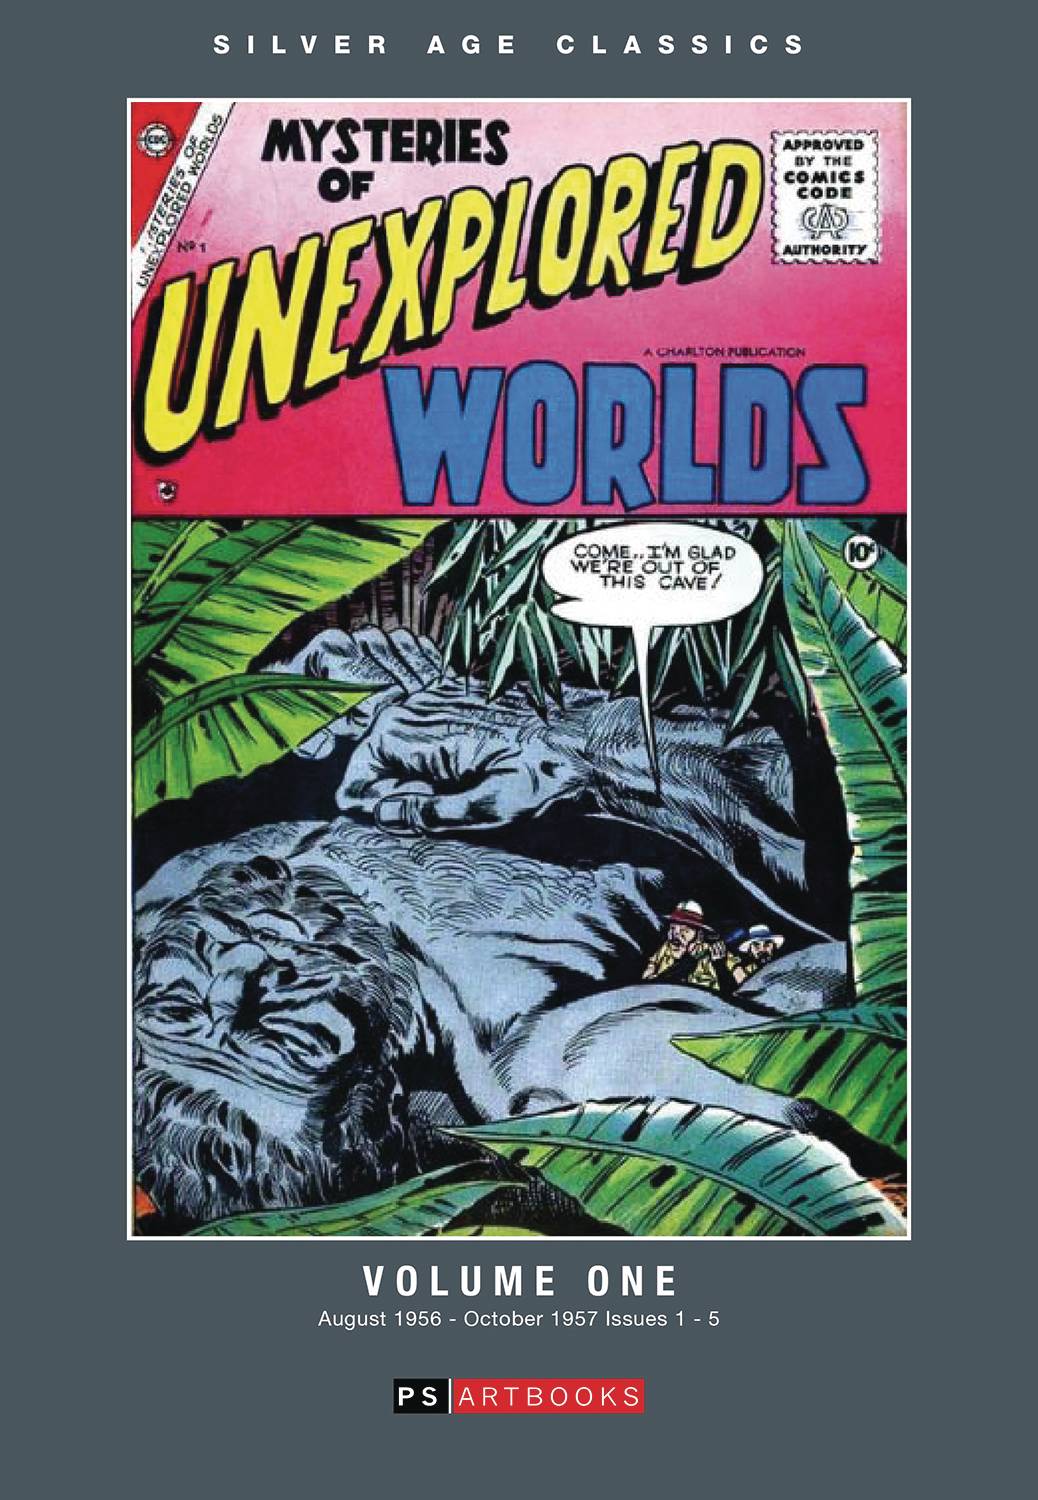 SILVER AGE CLASSICS MYSTERIES OF UNEXPLORED WORLDS HC 01